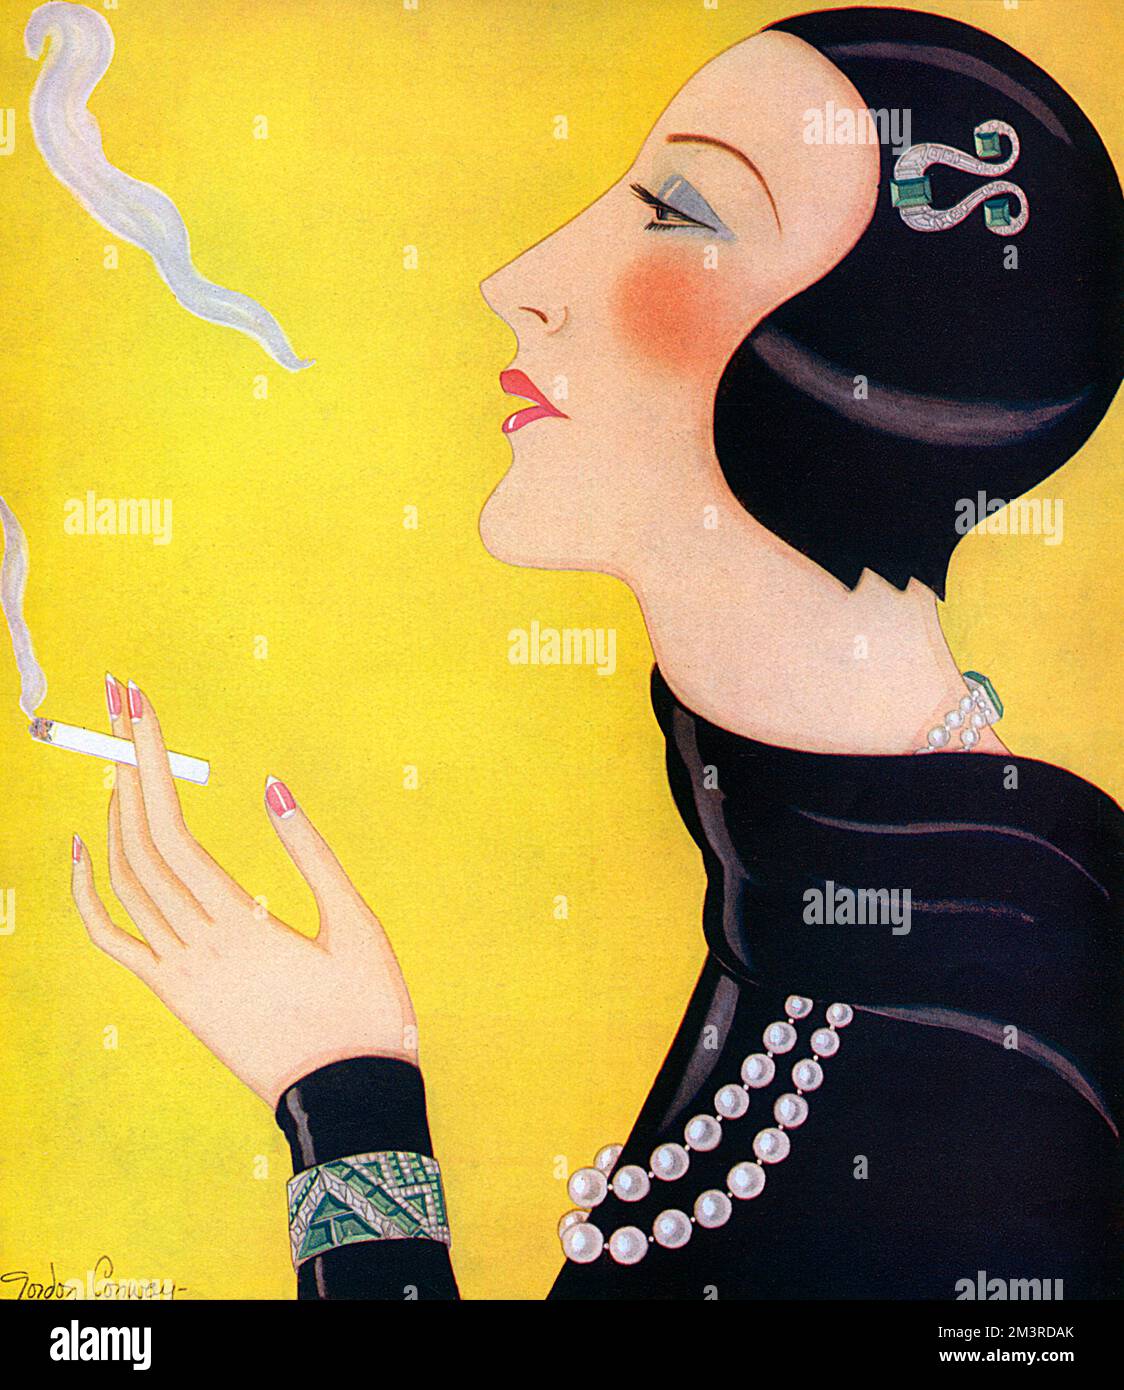 Stunning illustration by Gordon Conway depicting an elegant woman in black wearing a close-fitting cloche hat and some impressive emerald,diamond and pearl jewels, enjoying the pleasures of a solitary cigarette.  1931 Stock Photo